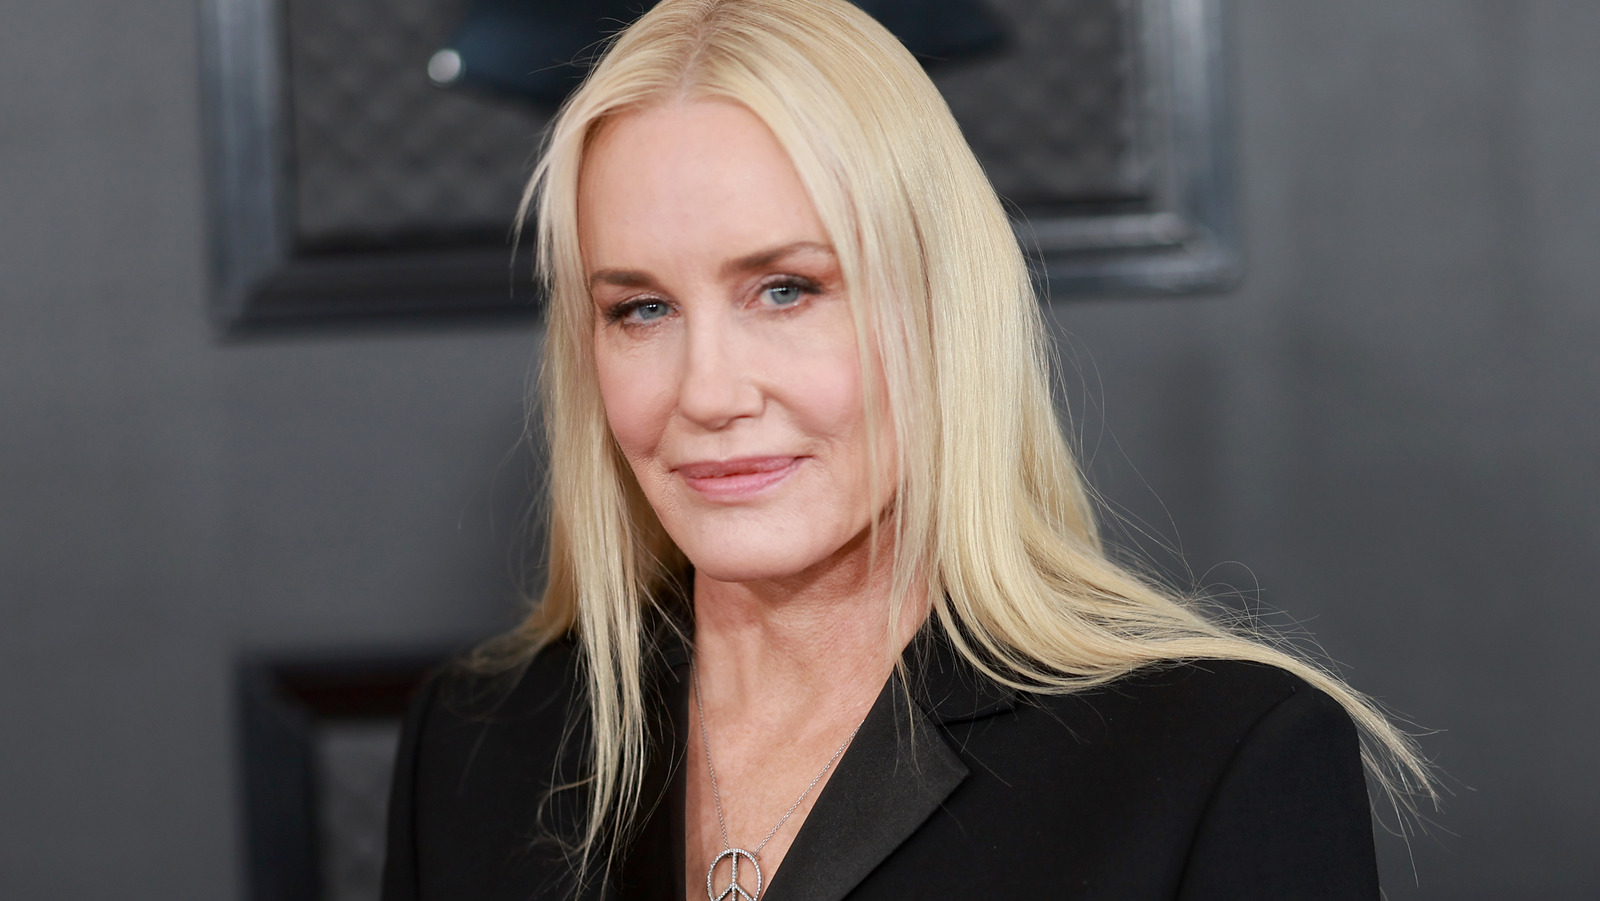 Daryl Hannah wearing a black suit